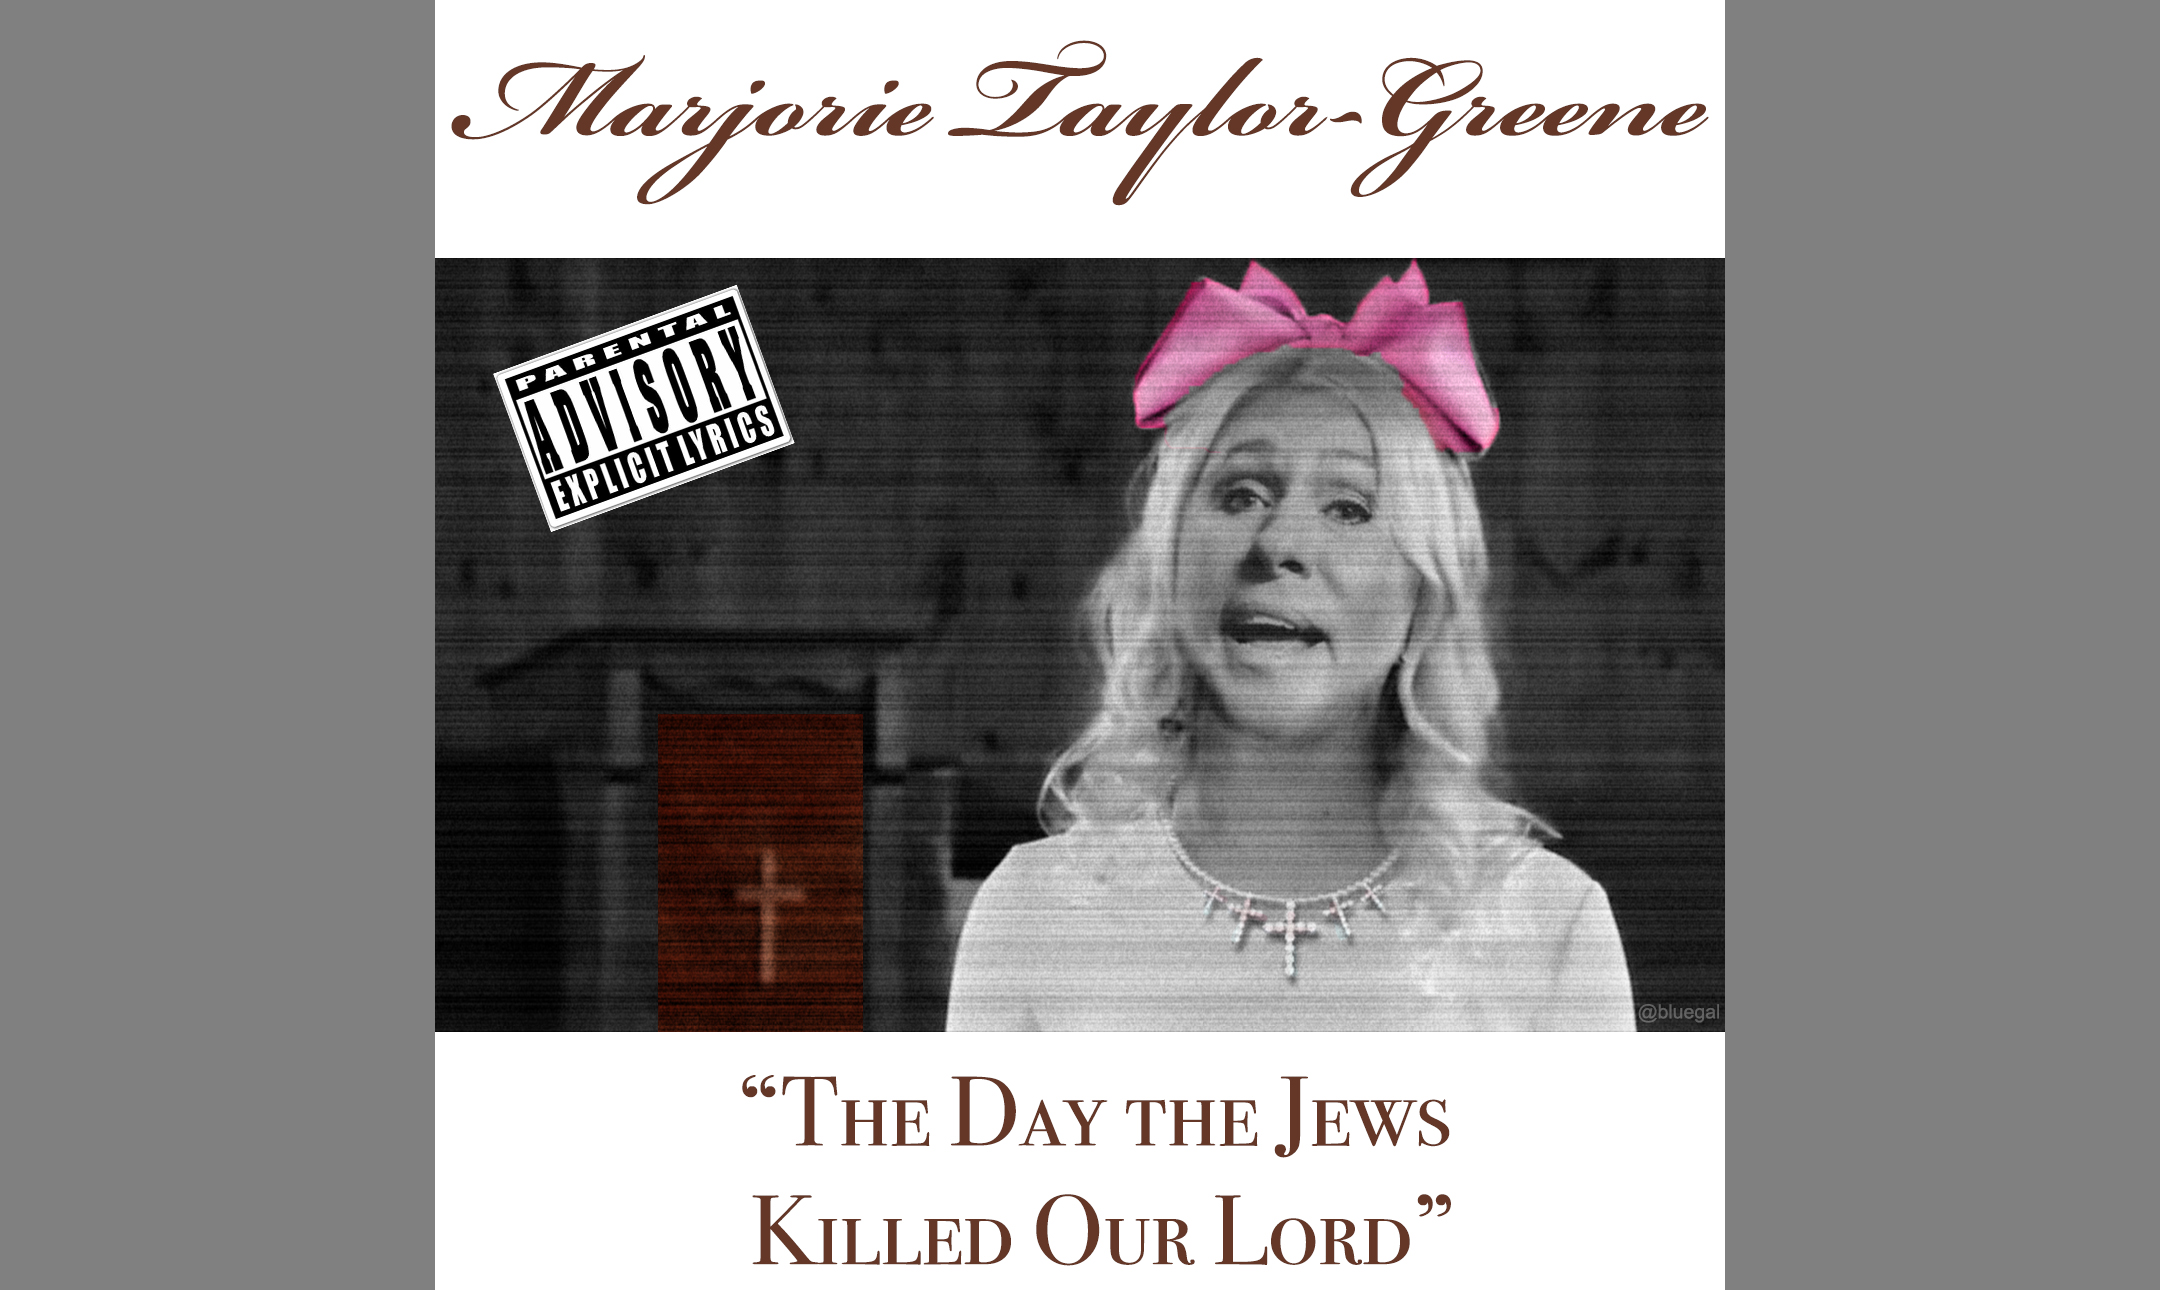 MikeoMarjorie Taylor Greene Goes Full-On 'null